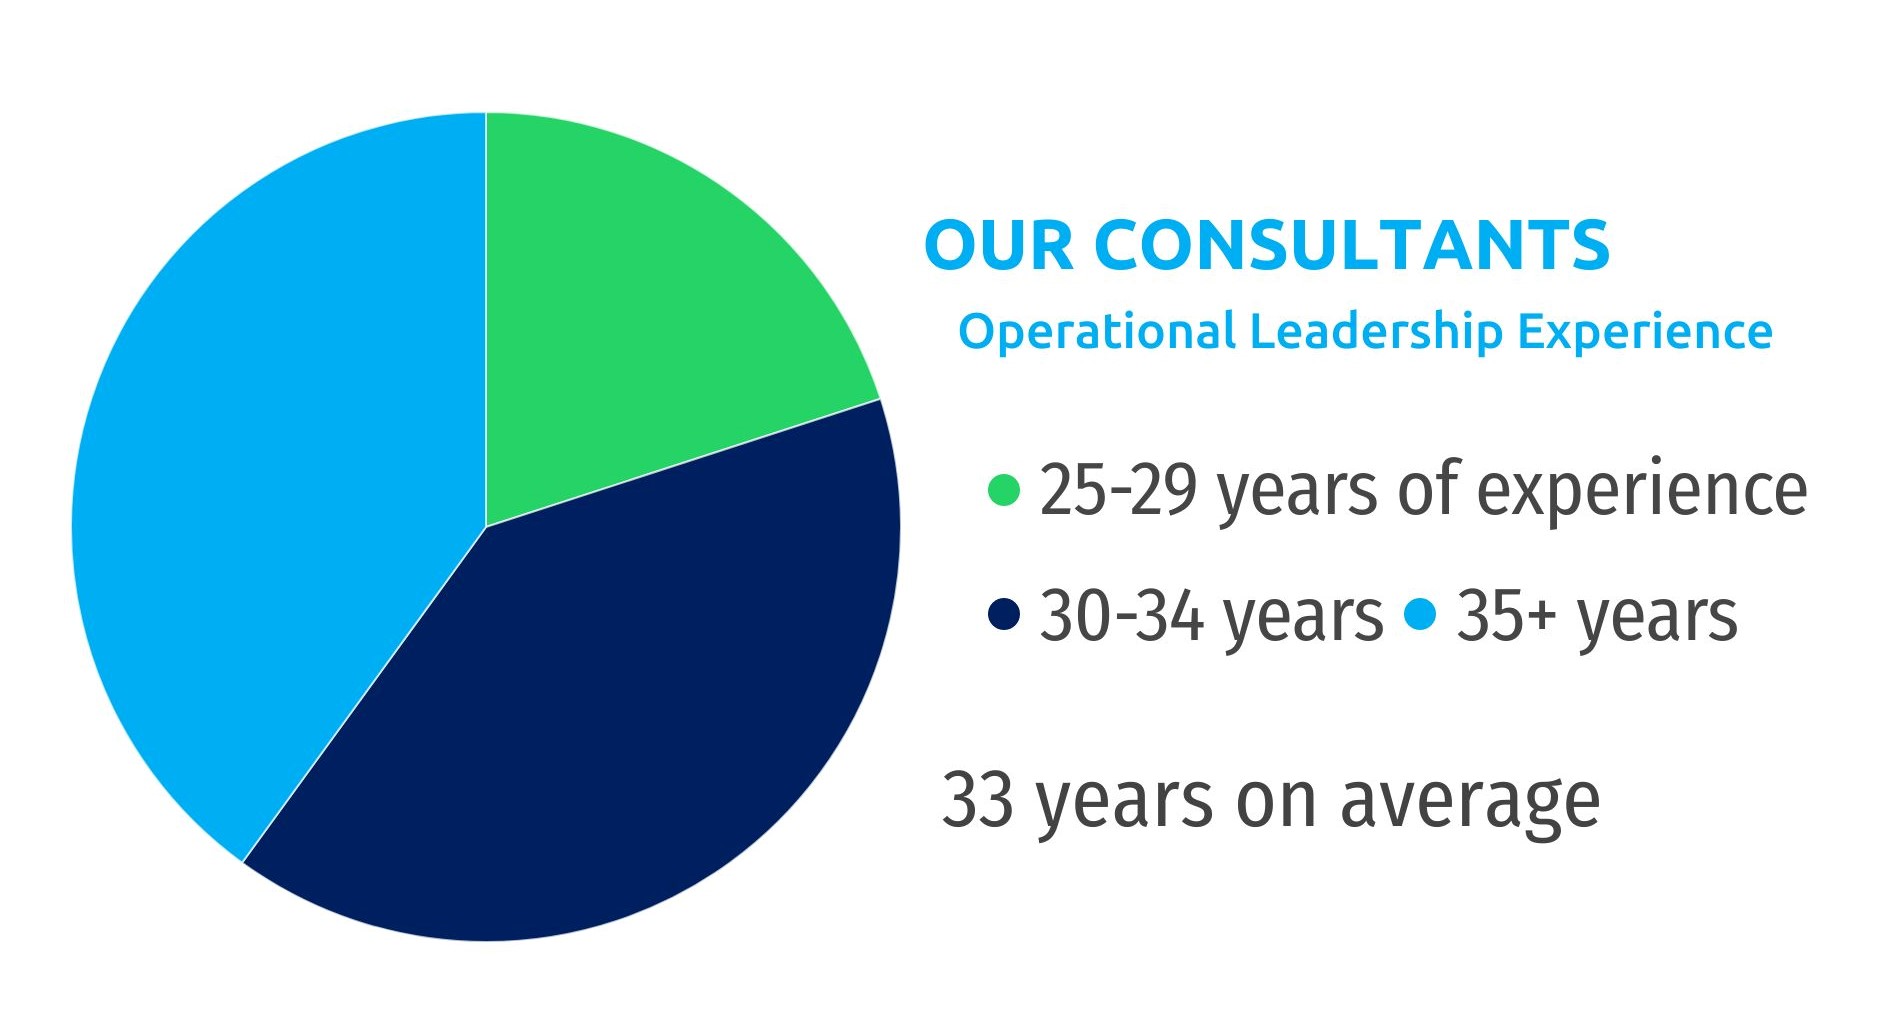 Our Consultants' Operational Leadership Experience. 33 years experience on average. 20% have 25-29 years of experience, 40% have 30-34 years of experience, and 40% have 35+ years of experience.